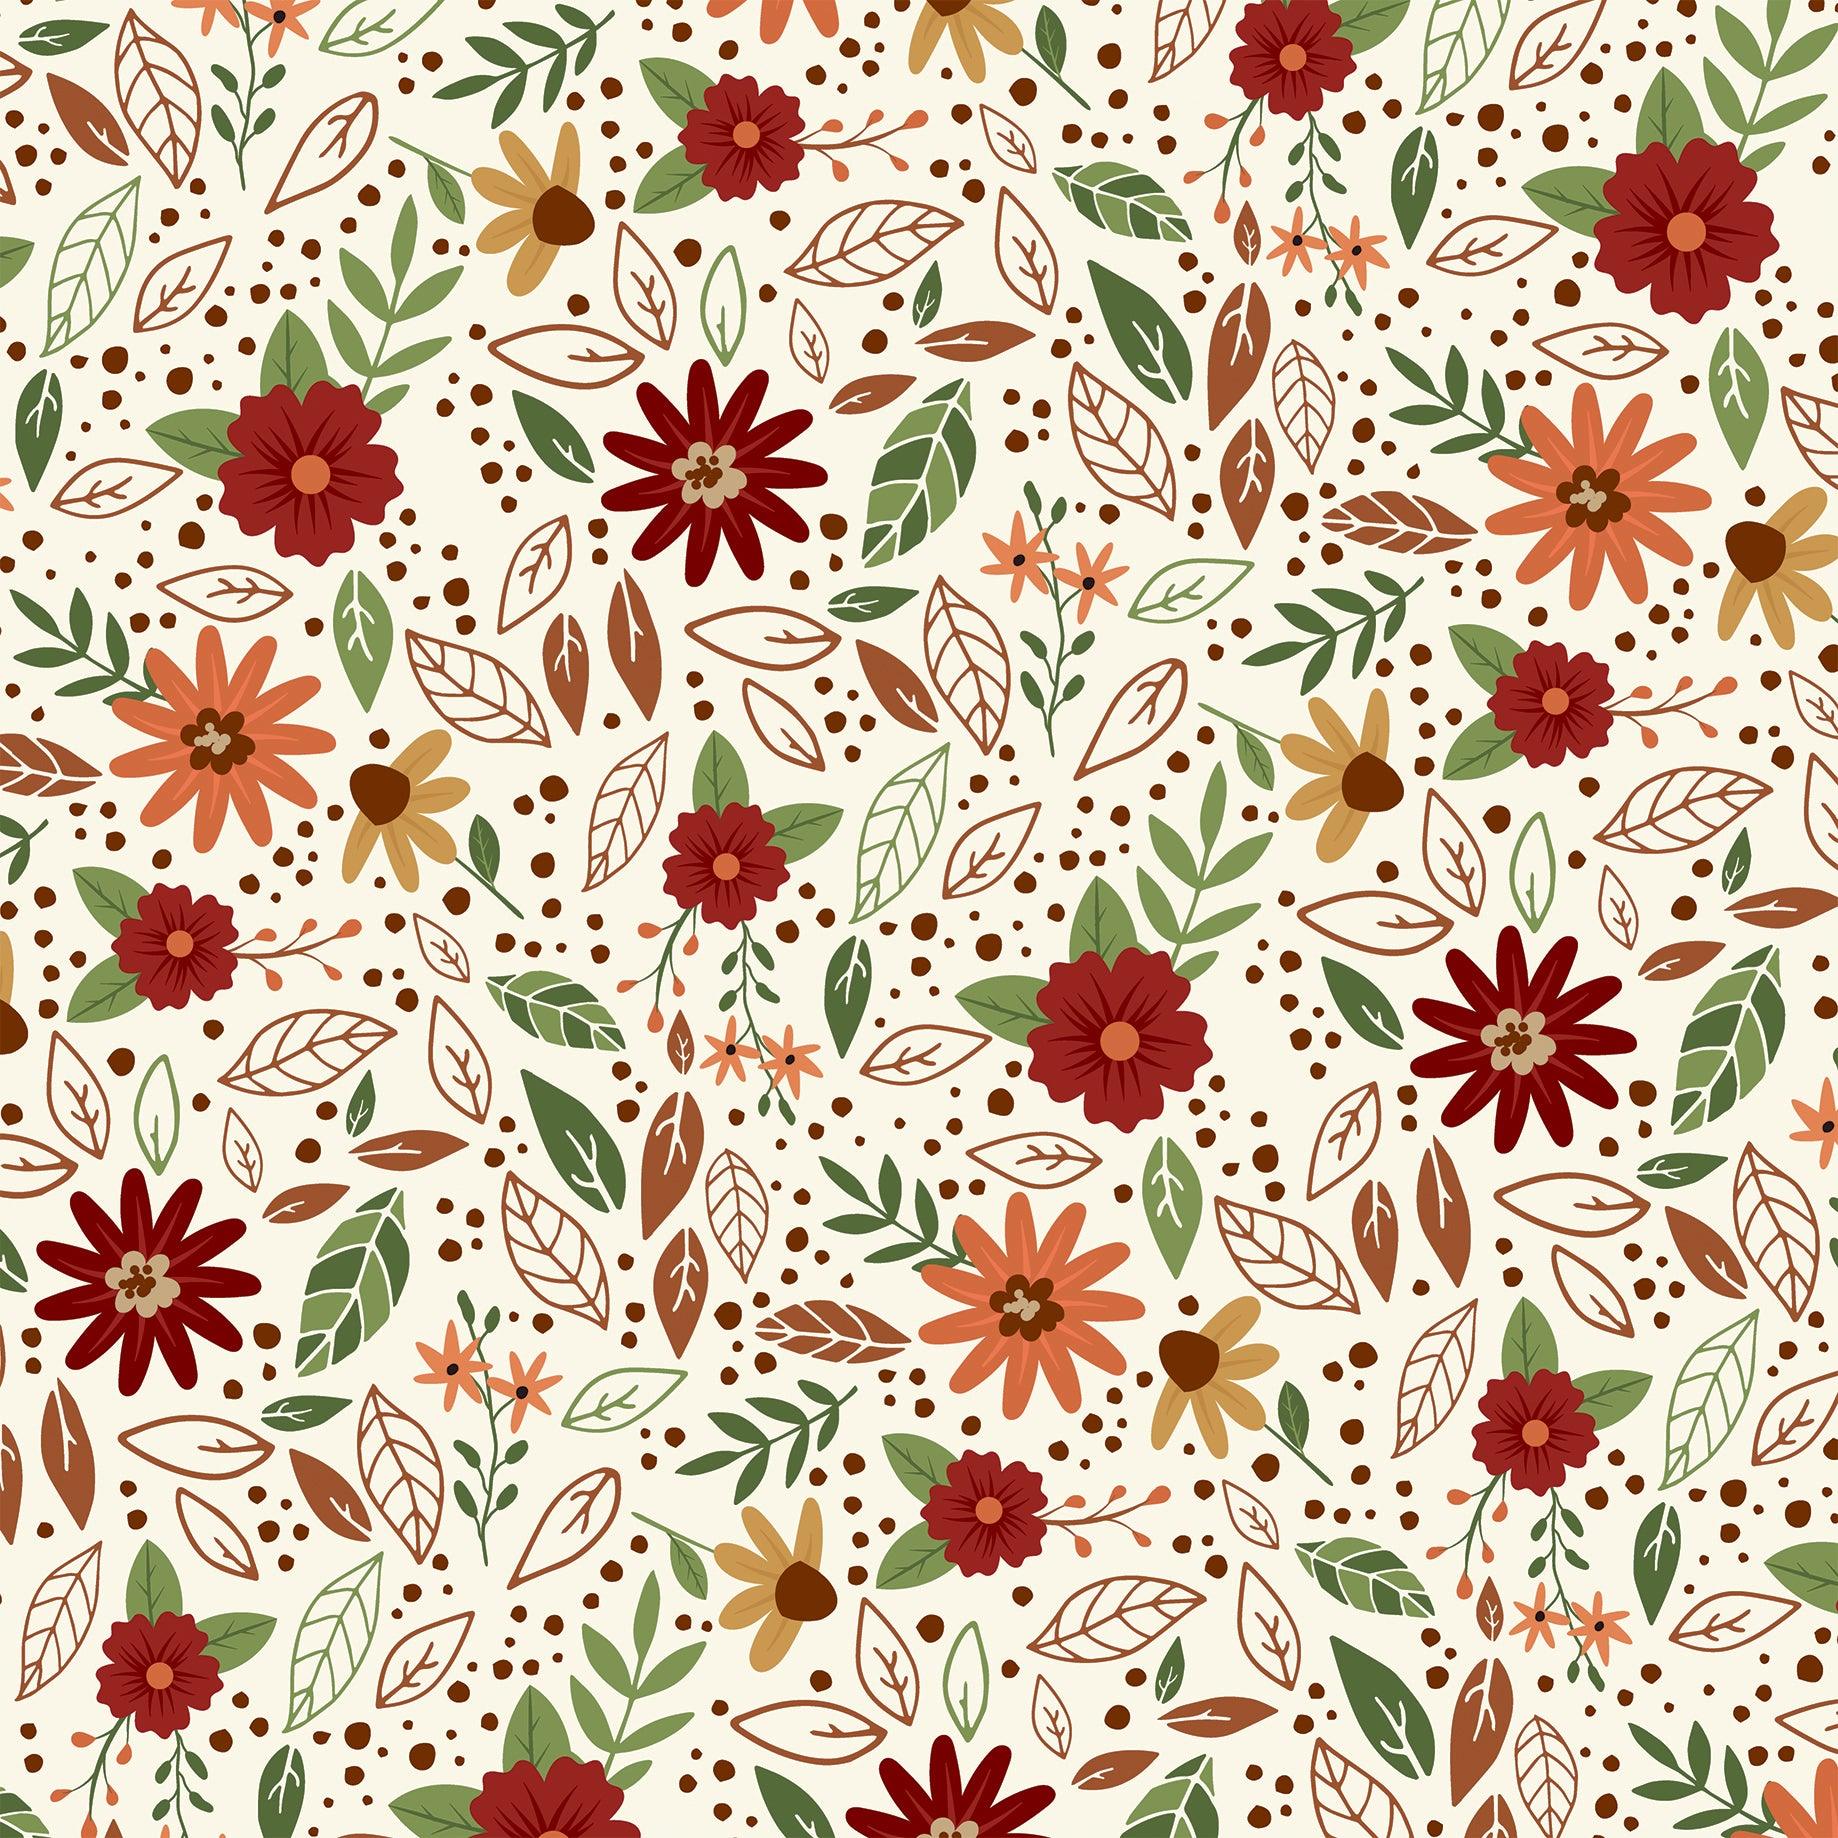 I Love Fall Collection Fall Flowers 12 x 12 Double-Sided Scrapbook Paper by Echo Park Paper - Scrapbook Supply Companies